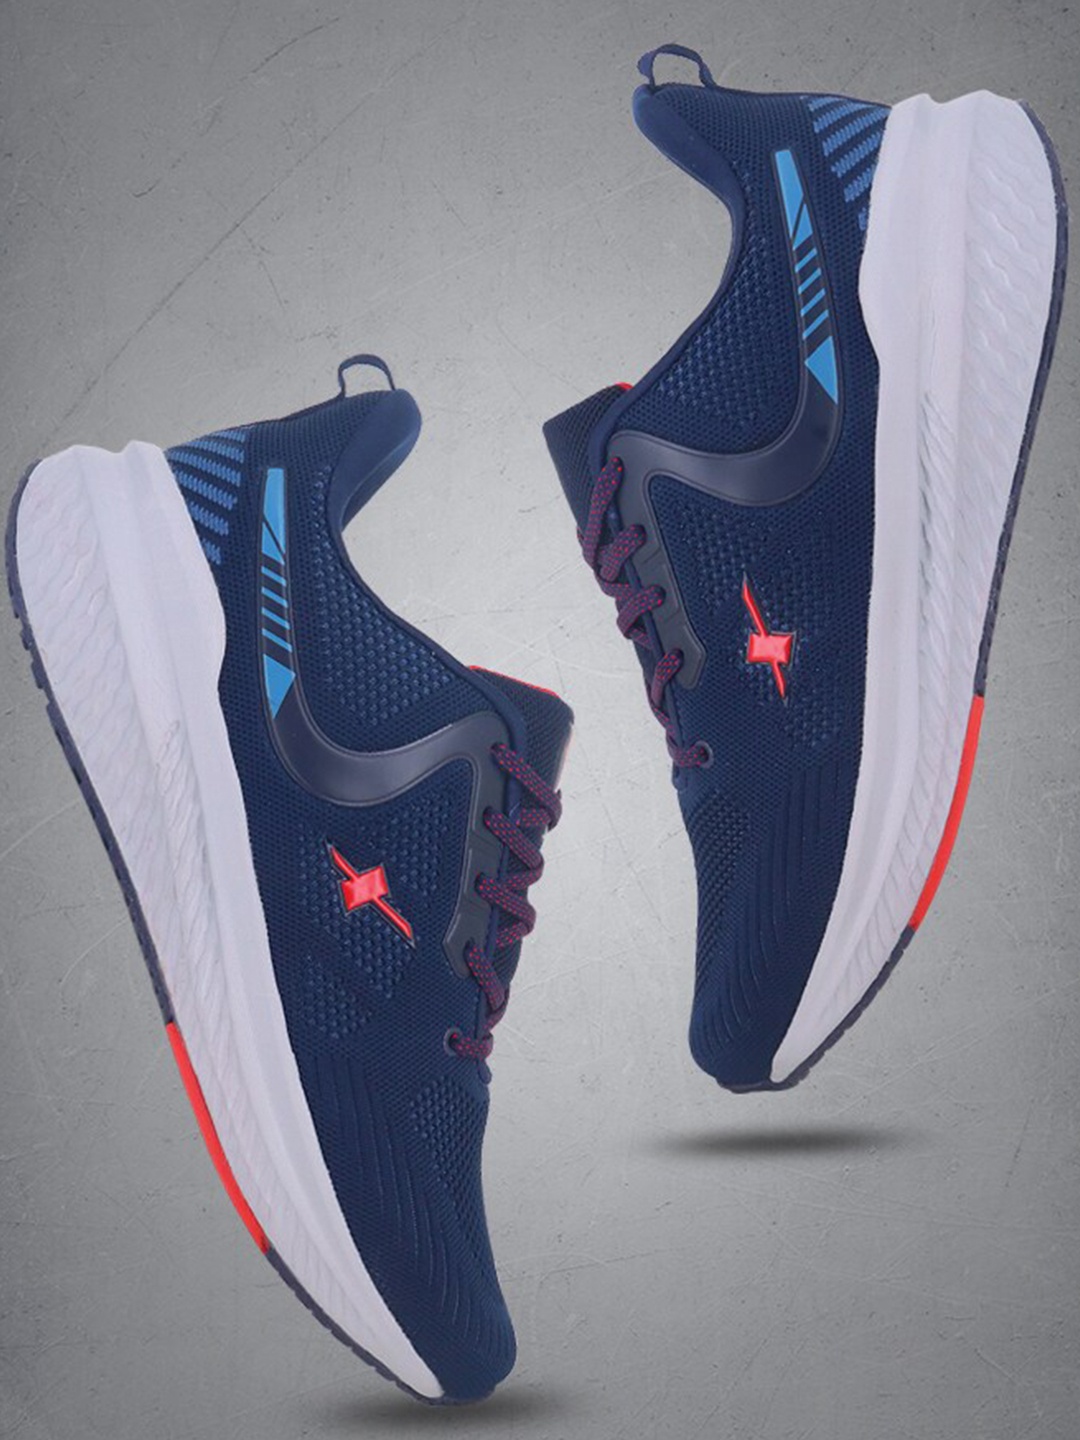 

Sparx Men Textured Lace-Up Running Shoes, Navy blue